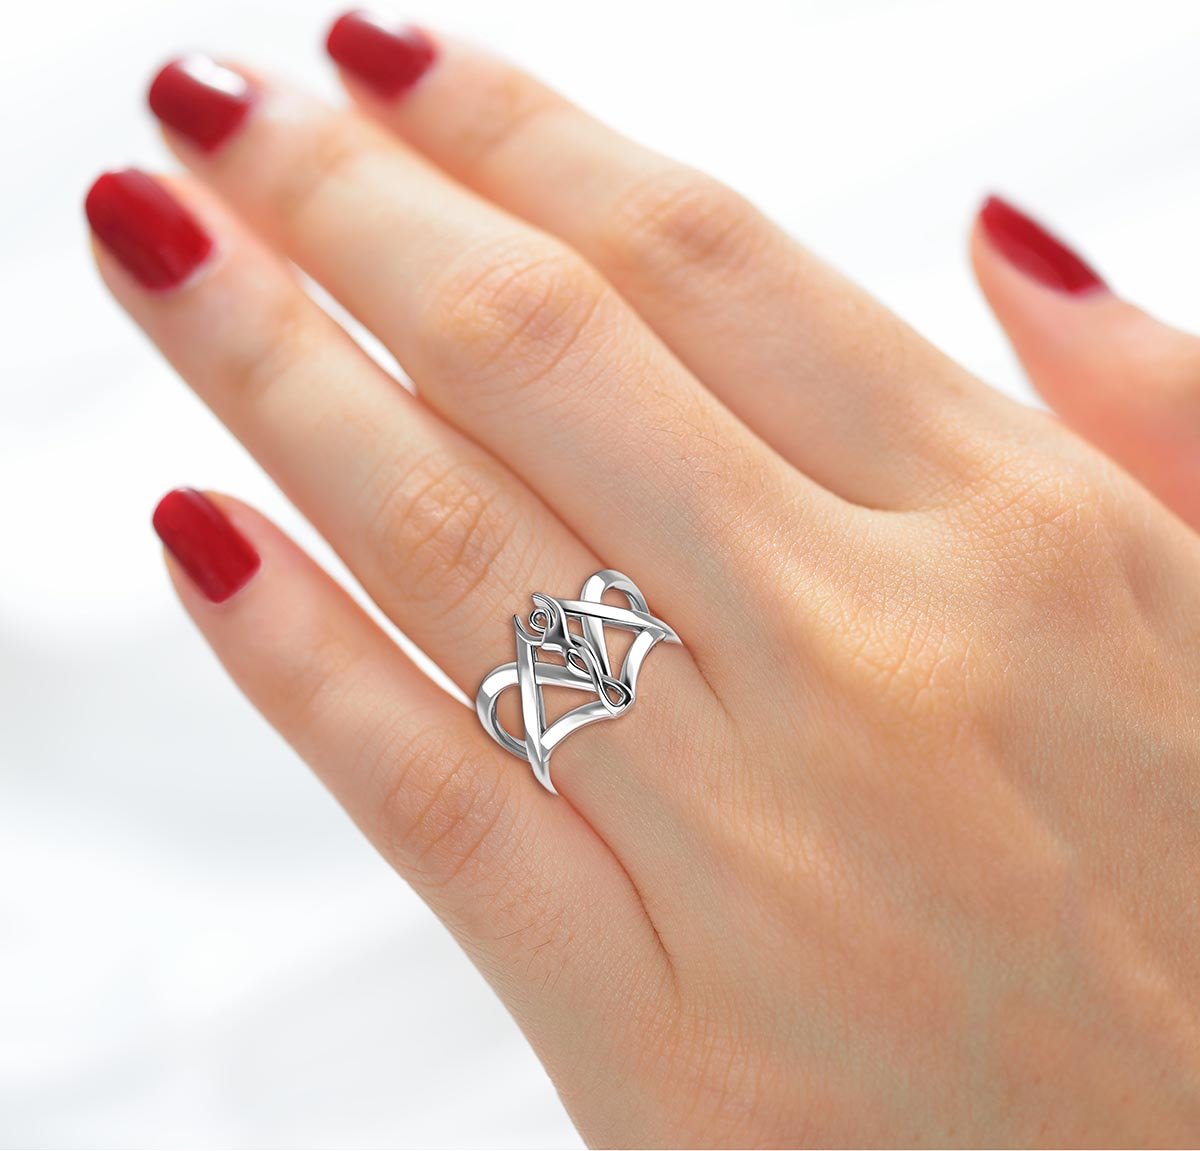 Ladies 925 Sterling Silver Goddess Ring - US Jewels